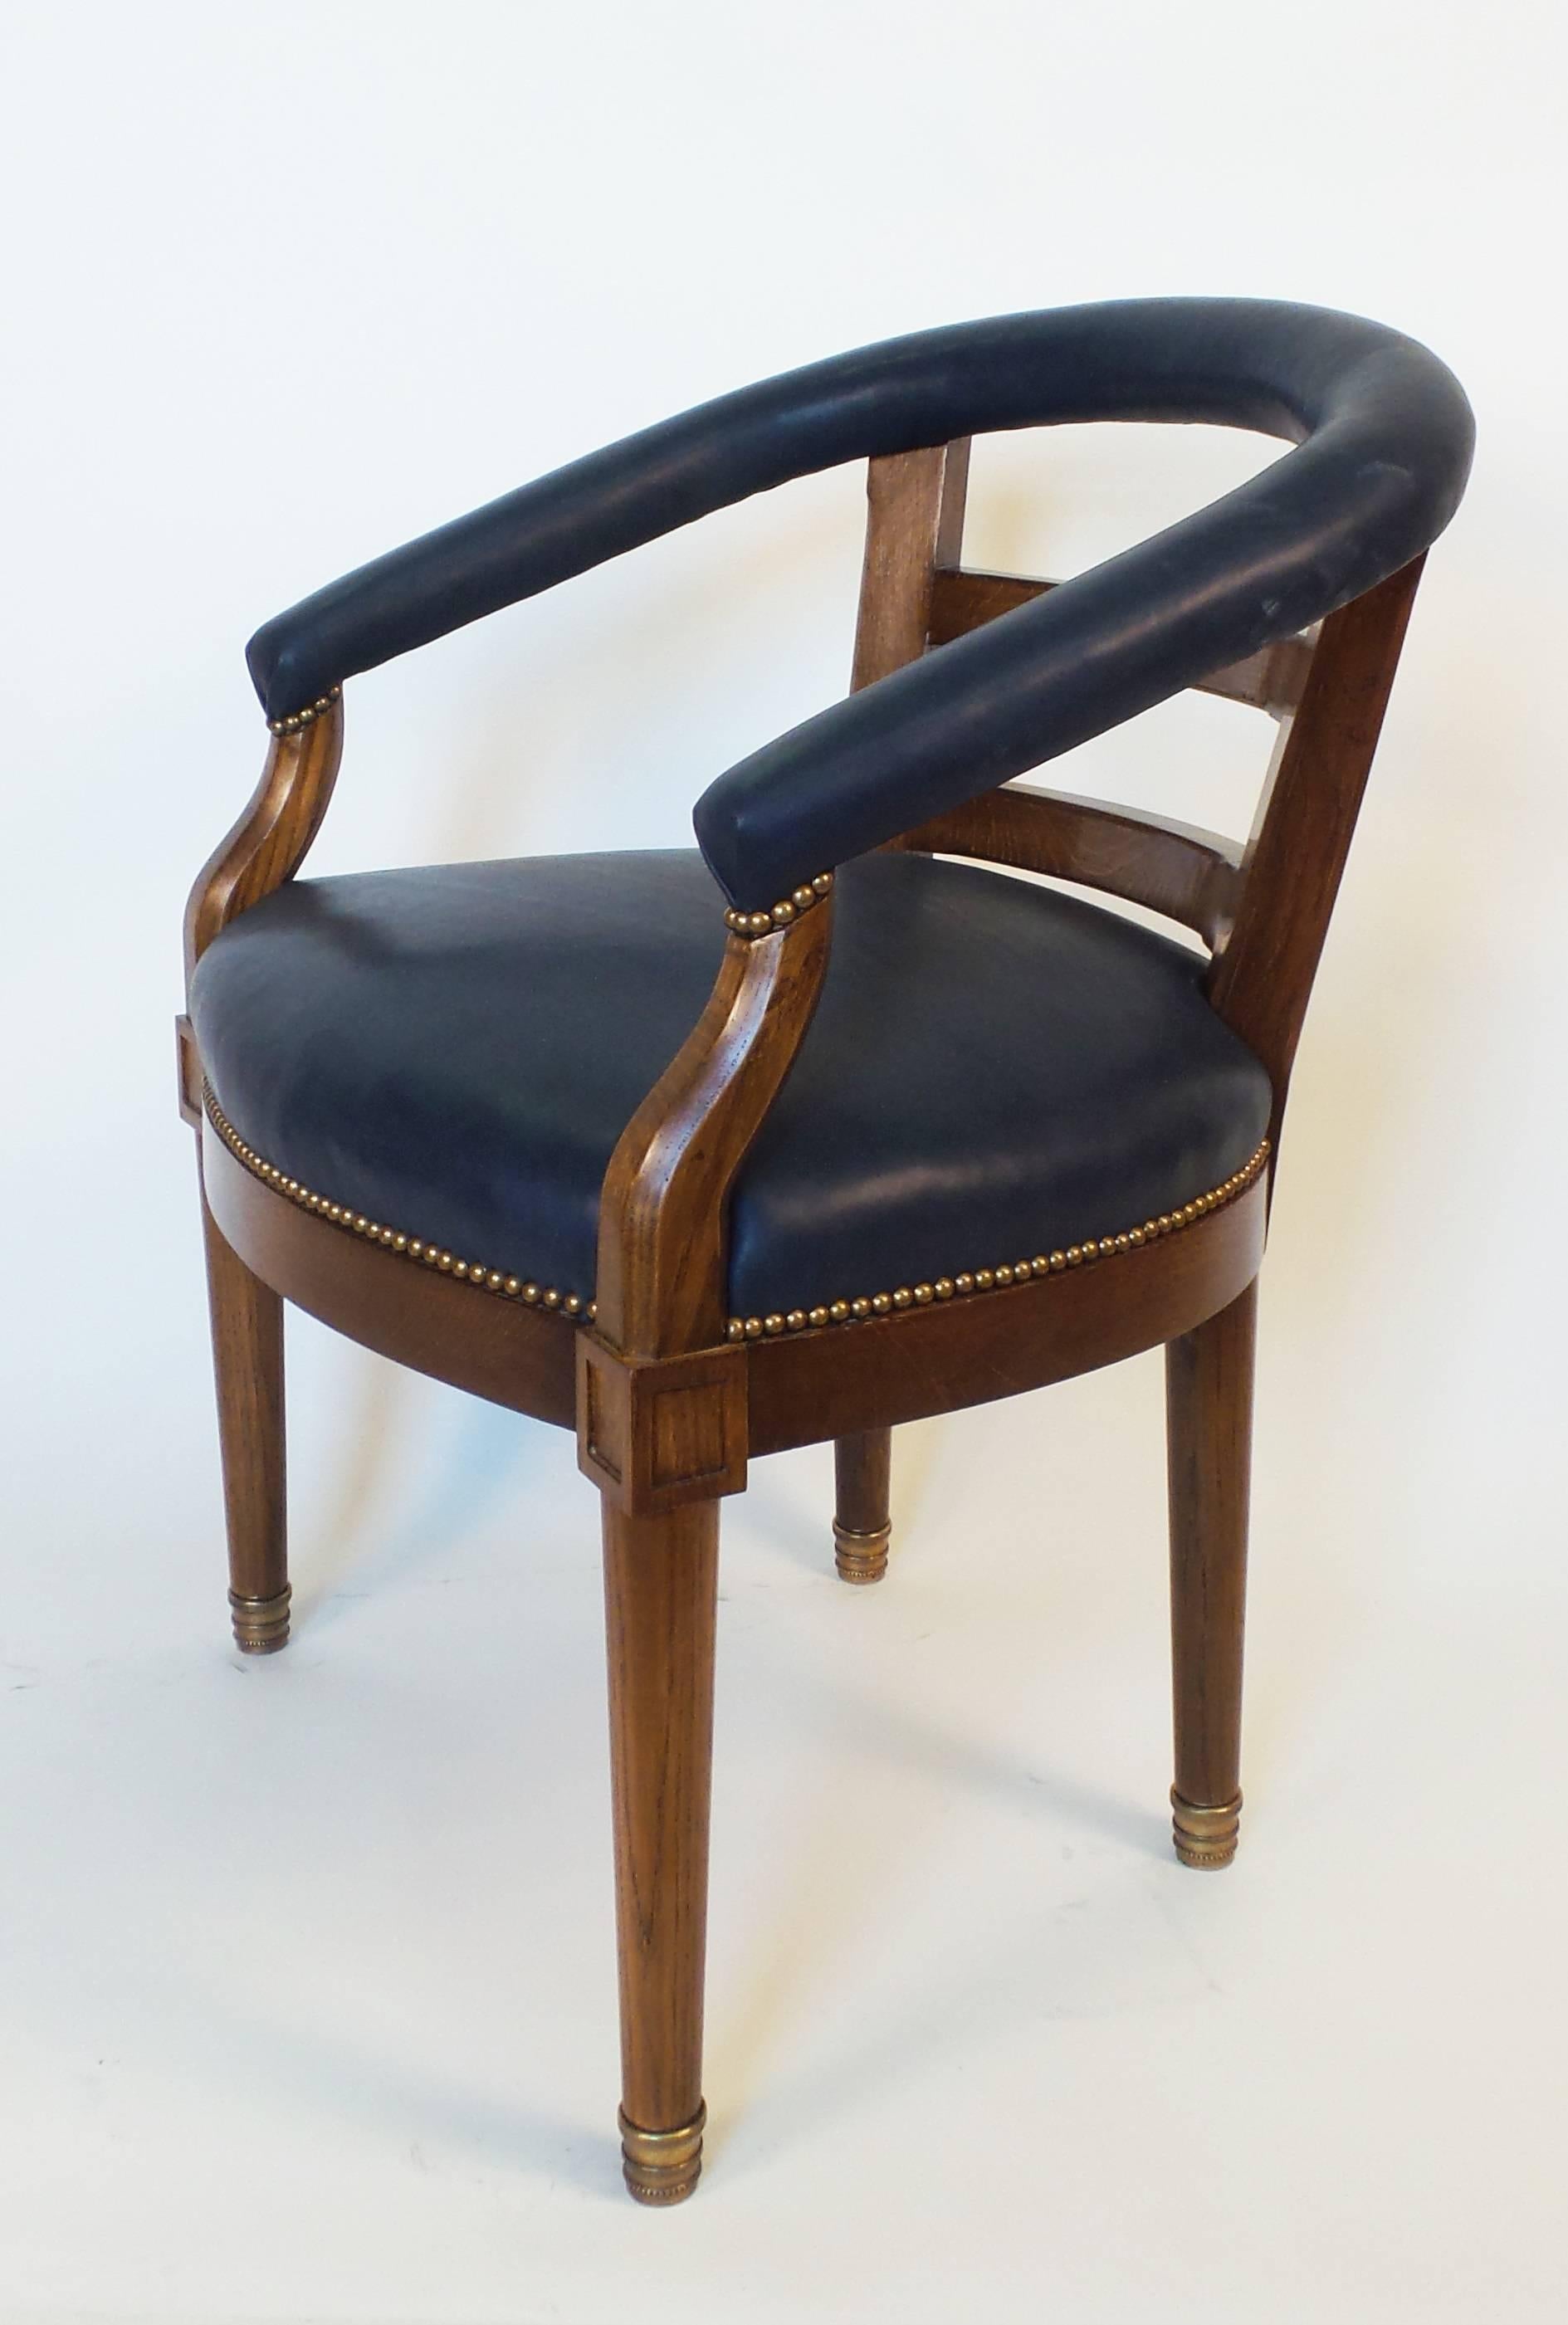 The American barrel-back armchair is an updated approach to early 20th century barrel back chairs. The back of the chair has been angled to better support both the back and arms of the user and the frame is crafted from durable white oak. Arms are